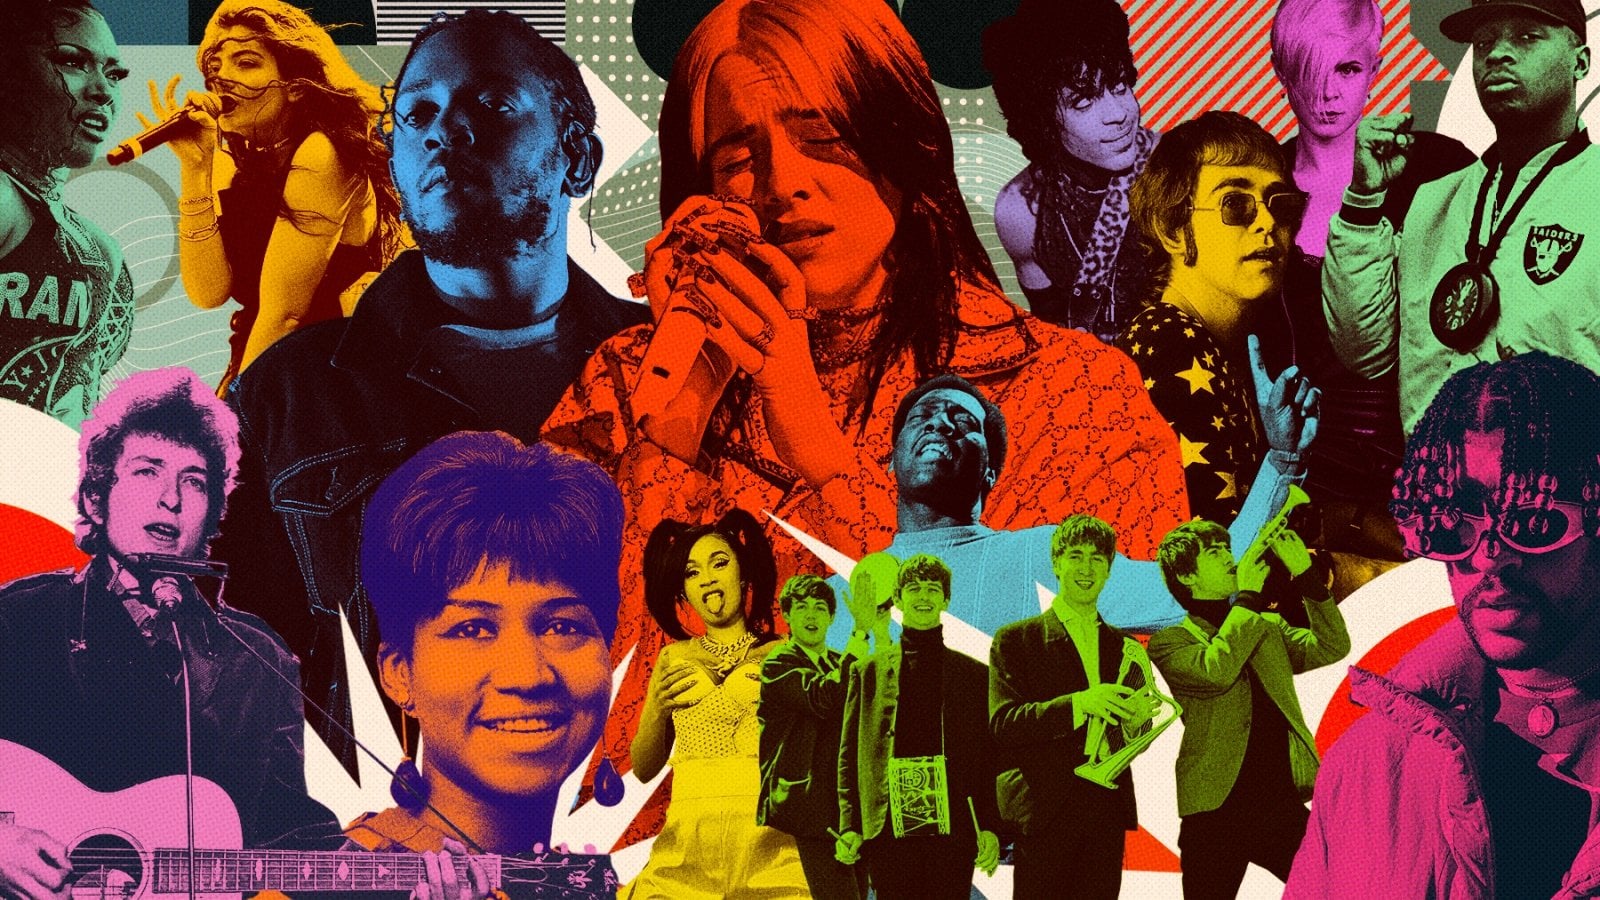 240216 Rolling Stone: 500 Best Songs of All Time (Dynamite is ranked at #346)